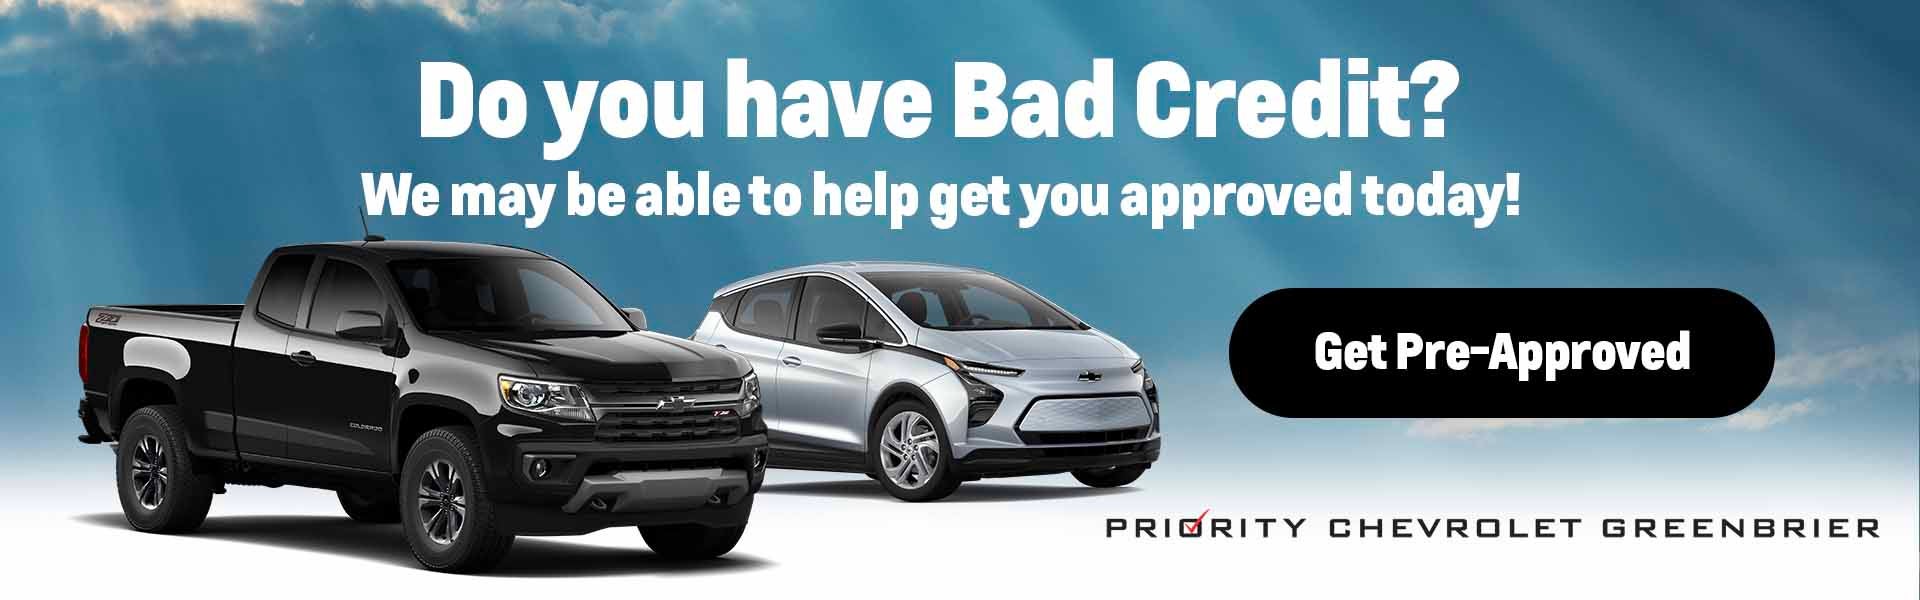 Do you have Bad Credit? We may be able to help get you approved today!